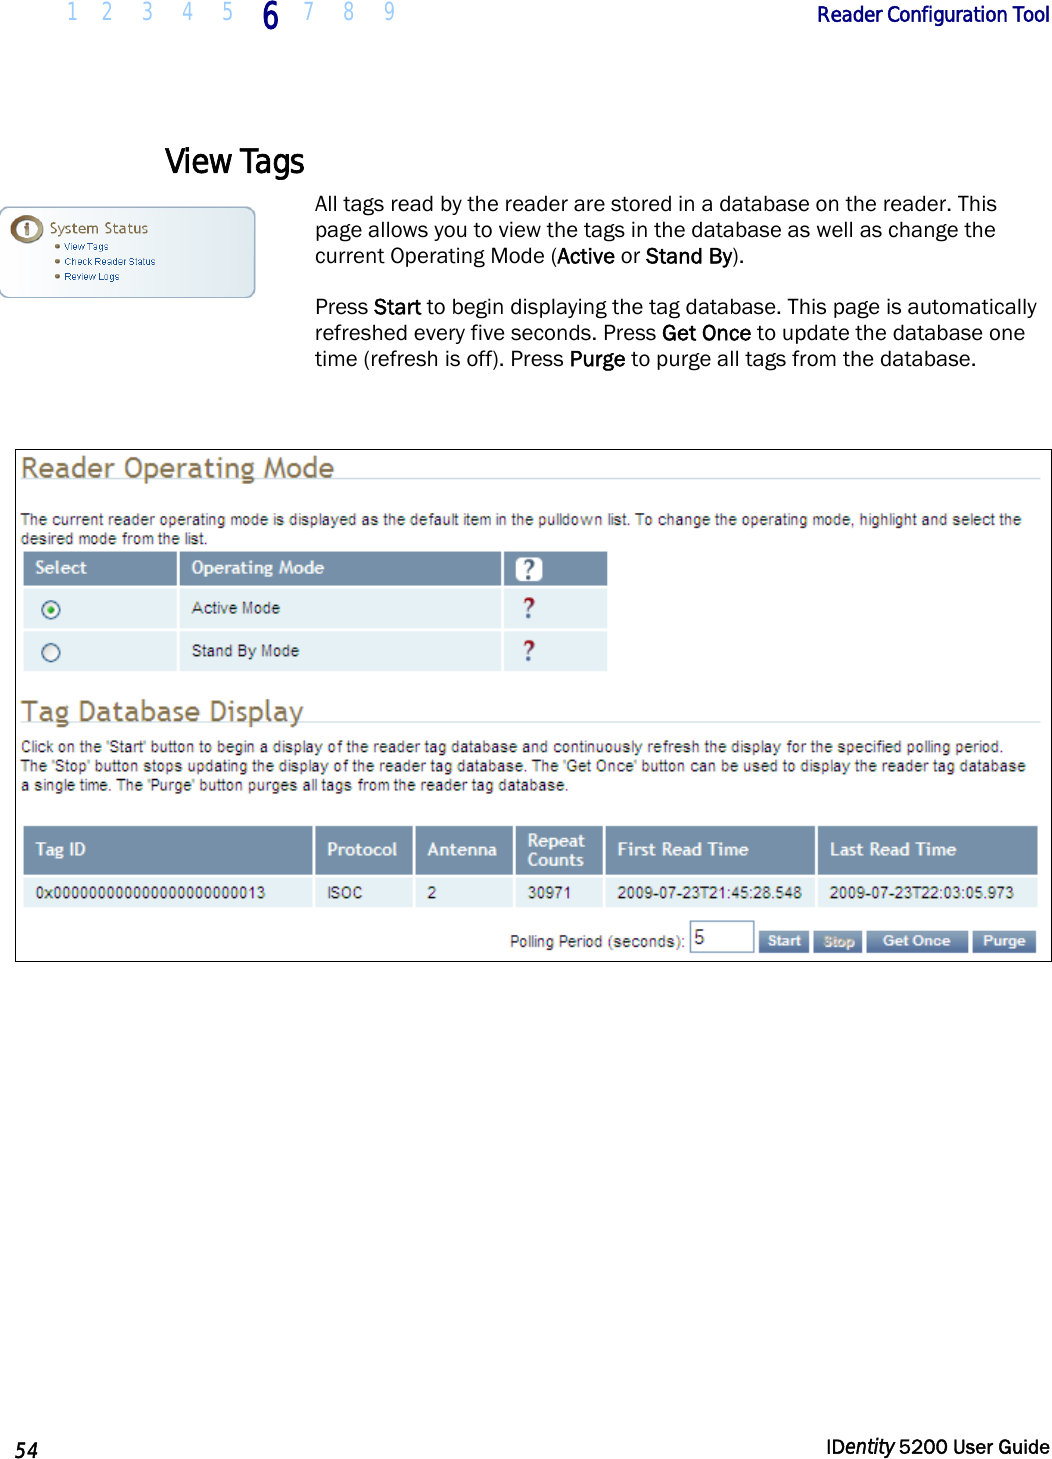  1 2  3  4  5 6 7 8 9       Reader Configuration Tool   54  IDentity 5200 User Guide  View Tags All tags read by the reader are stored in a database on the reader. This page allows you to view the tags in the database as well as change the current Operating Mode (Active or Stand By).  Press Start to begin displaying the tag database. This page is automatically refreshed every five seconds. Press Get Once to update the database one time (refresh is off). Press Purge to purge all tags from the database.    